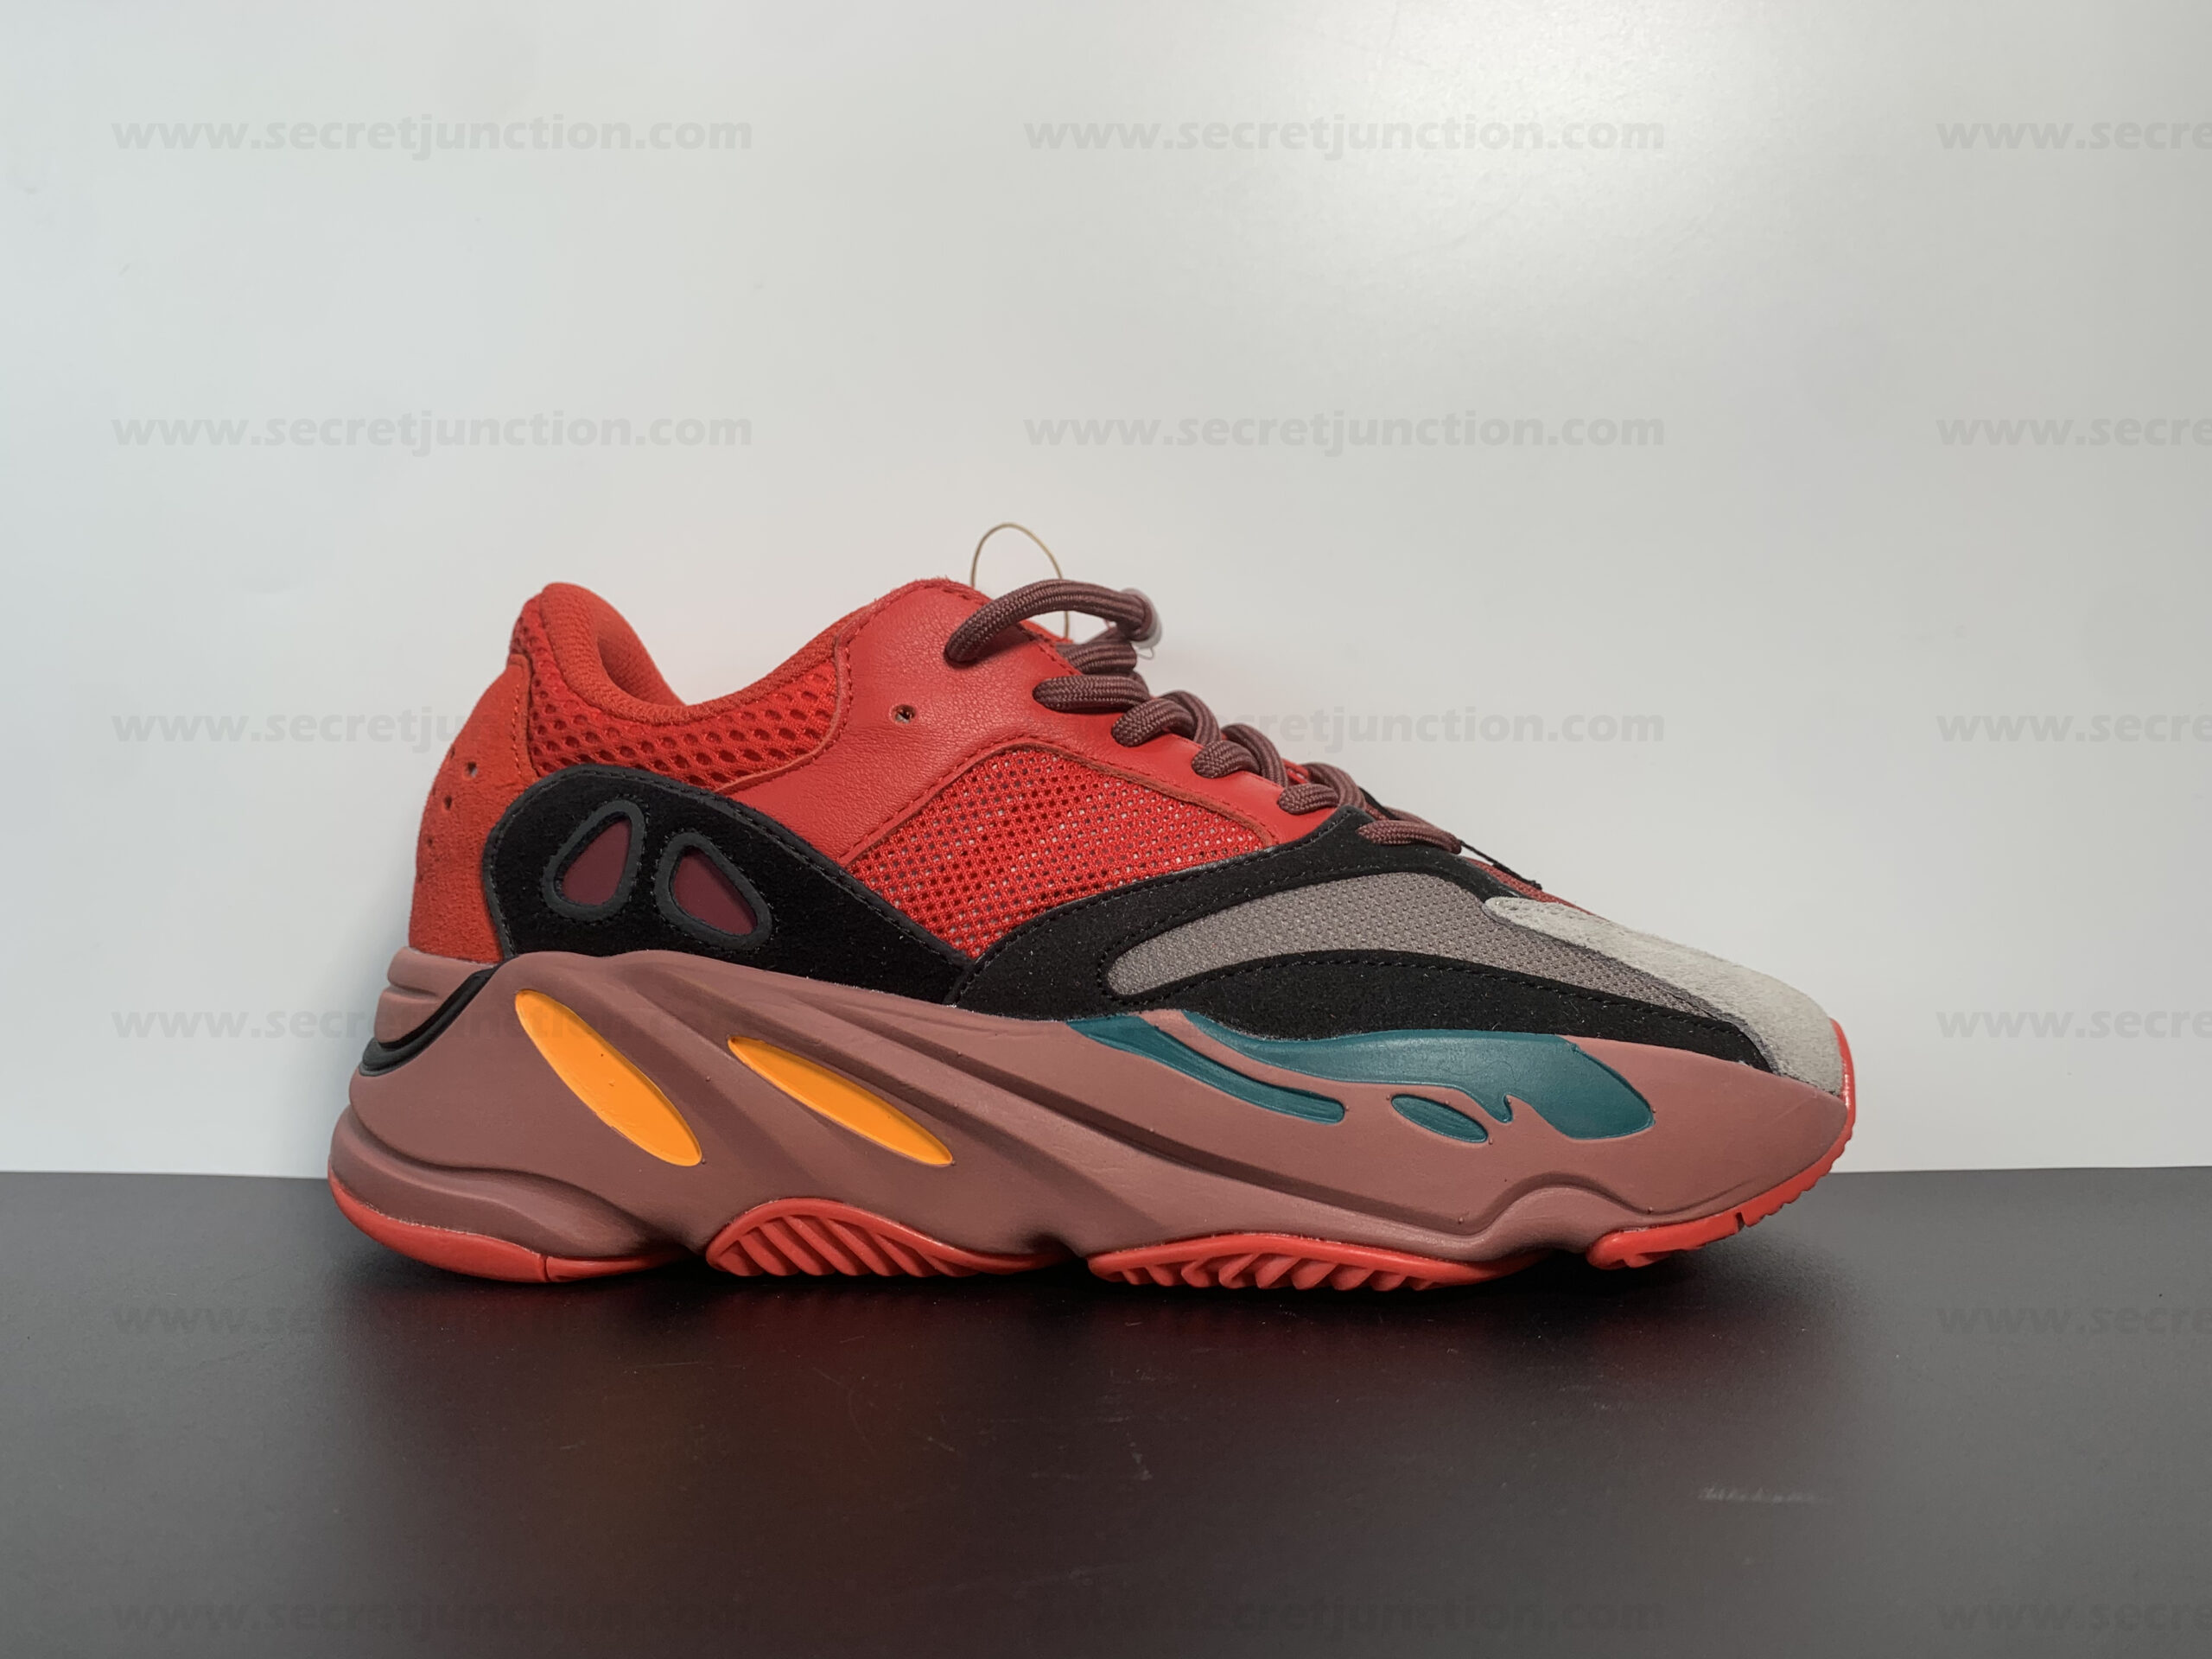 ADIDAS YEEZY BOOST 700 – “HI-RES RED”